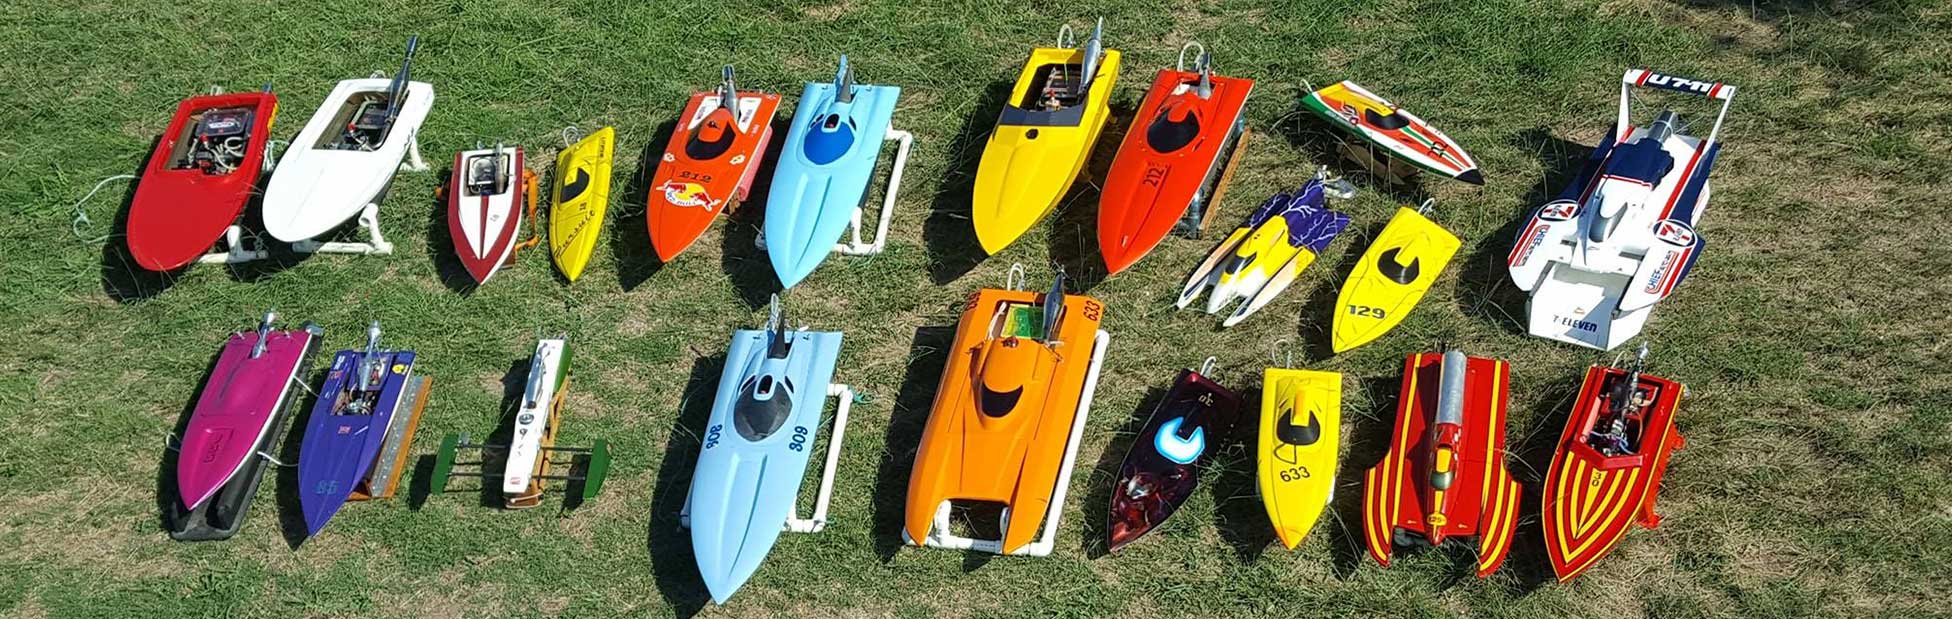 Colourful model boats in rows on green grass